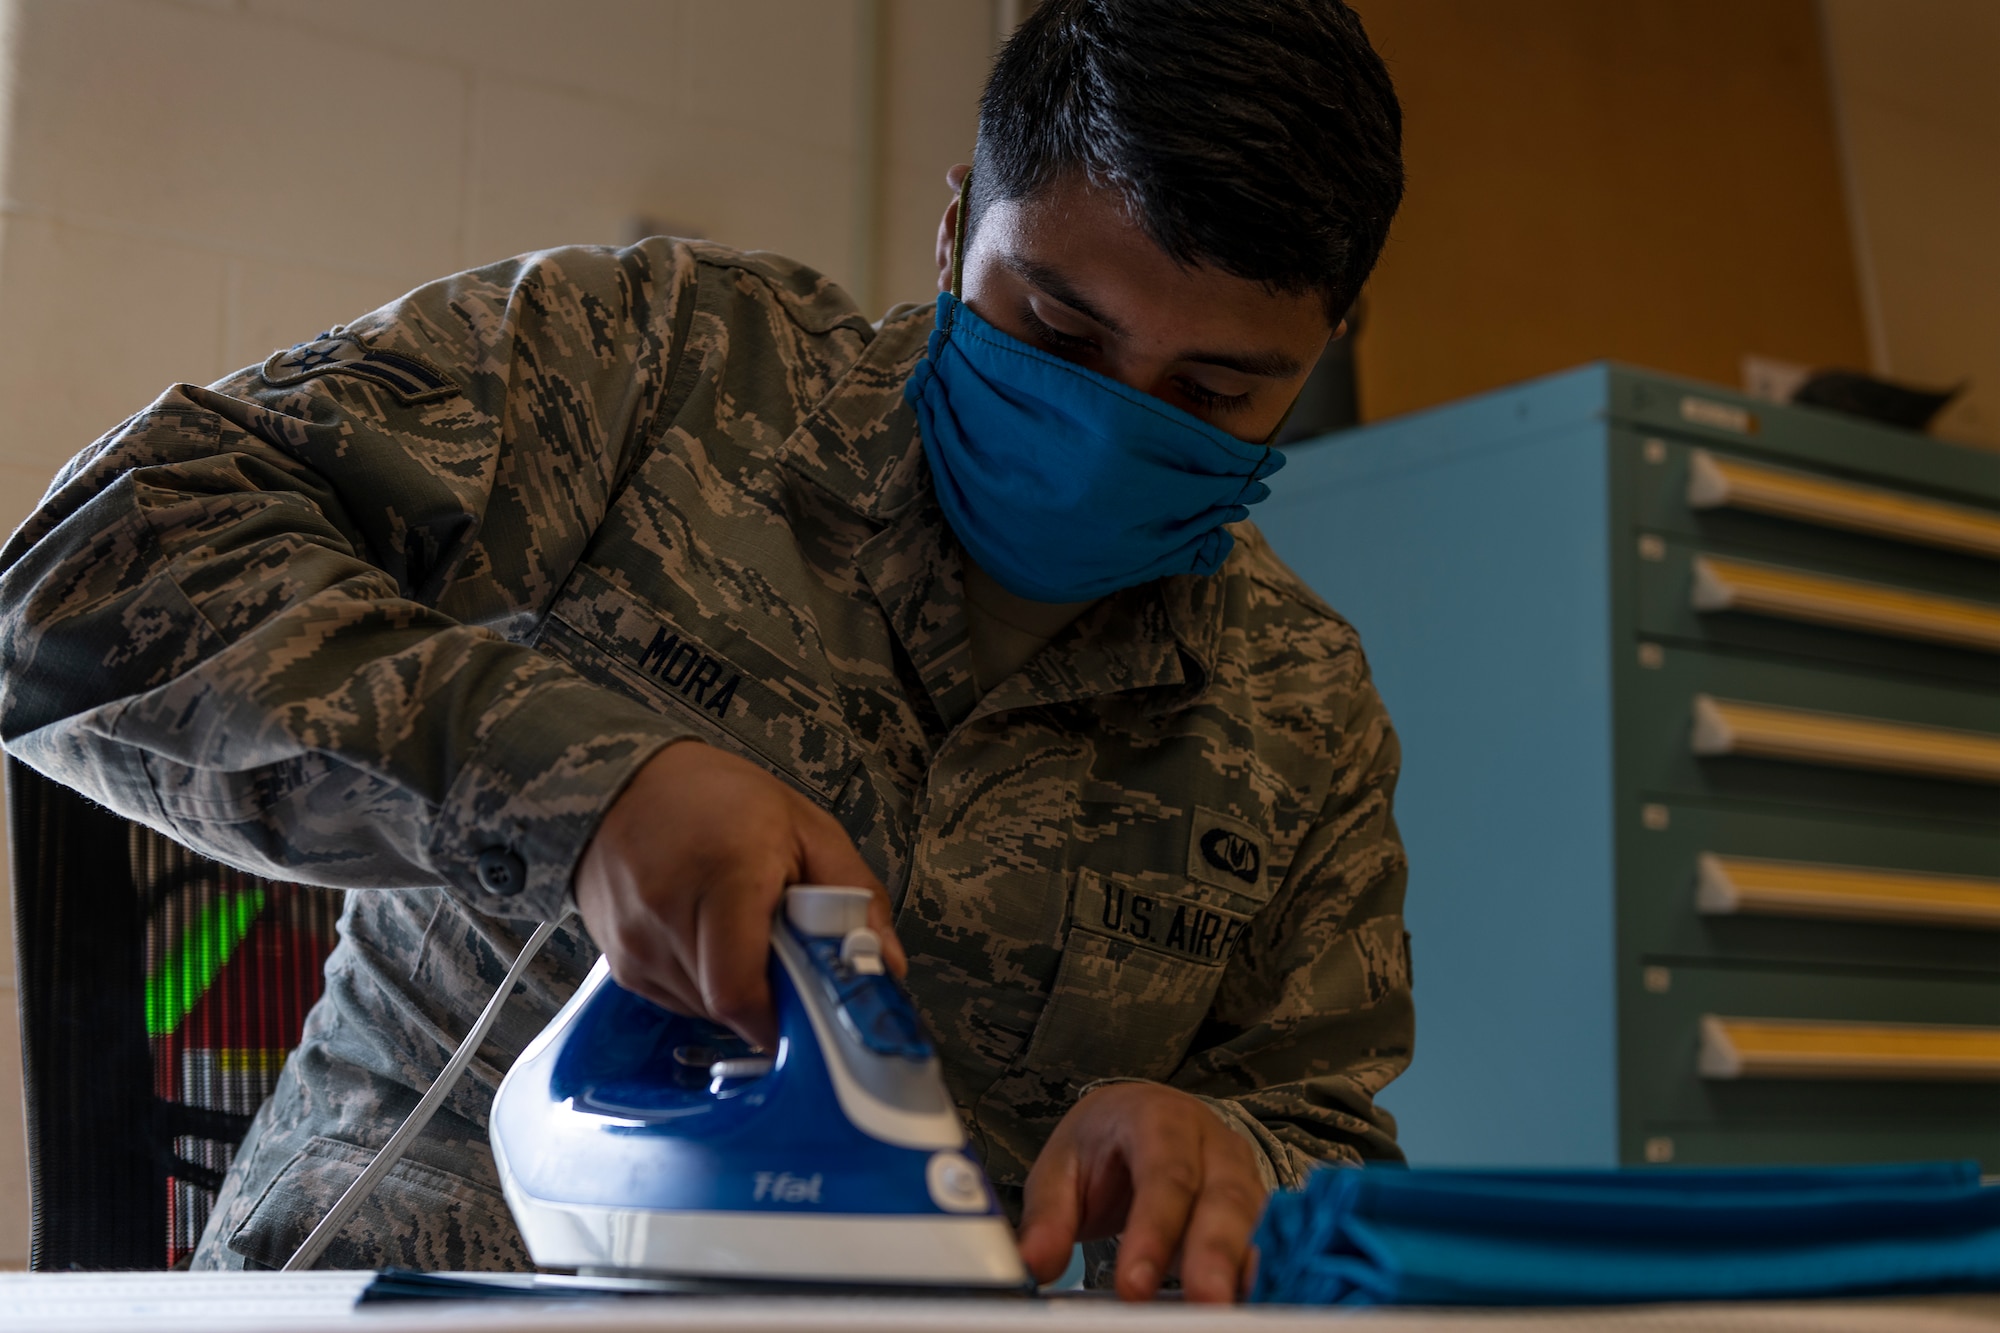 ALTUS AIR FORCE BASE, Okla. - U.S. Air Force Airman First Class Luis Mora, an Air Crew Flight Equipment (AFE) apprentice assigned to the 97th Operations Support Squadron, irons face masks for base members, April 6, 2020 at Altus Air Force Base Oklahoma.